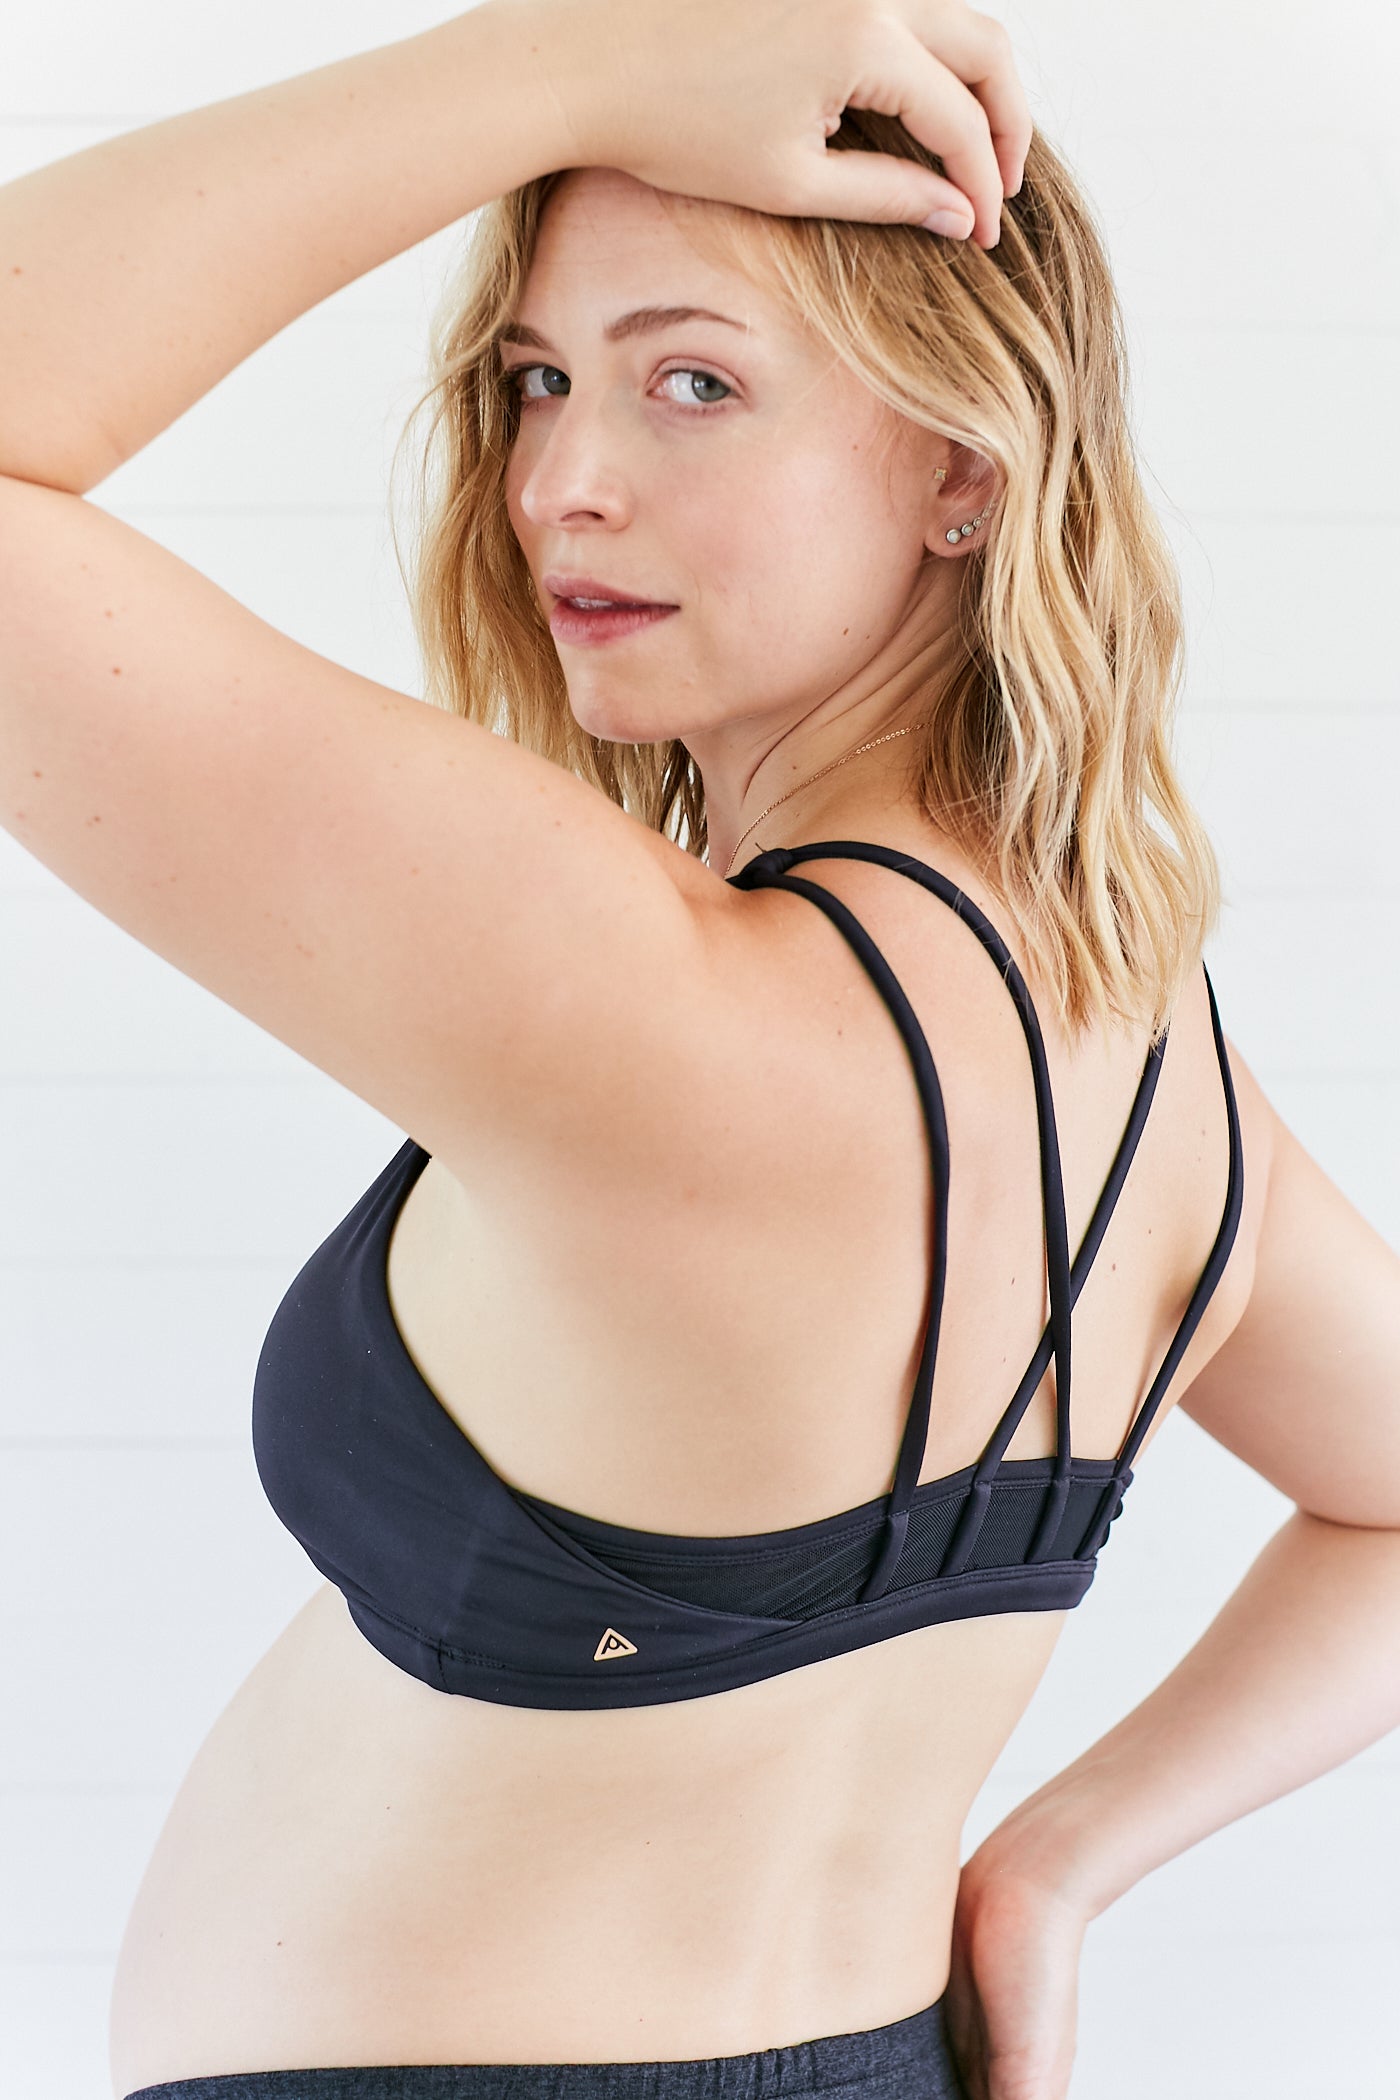 NipCo - The OG Bra - A supportive and second skin maternity bra